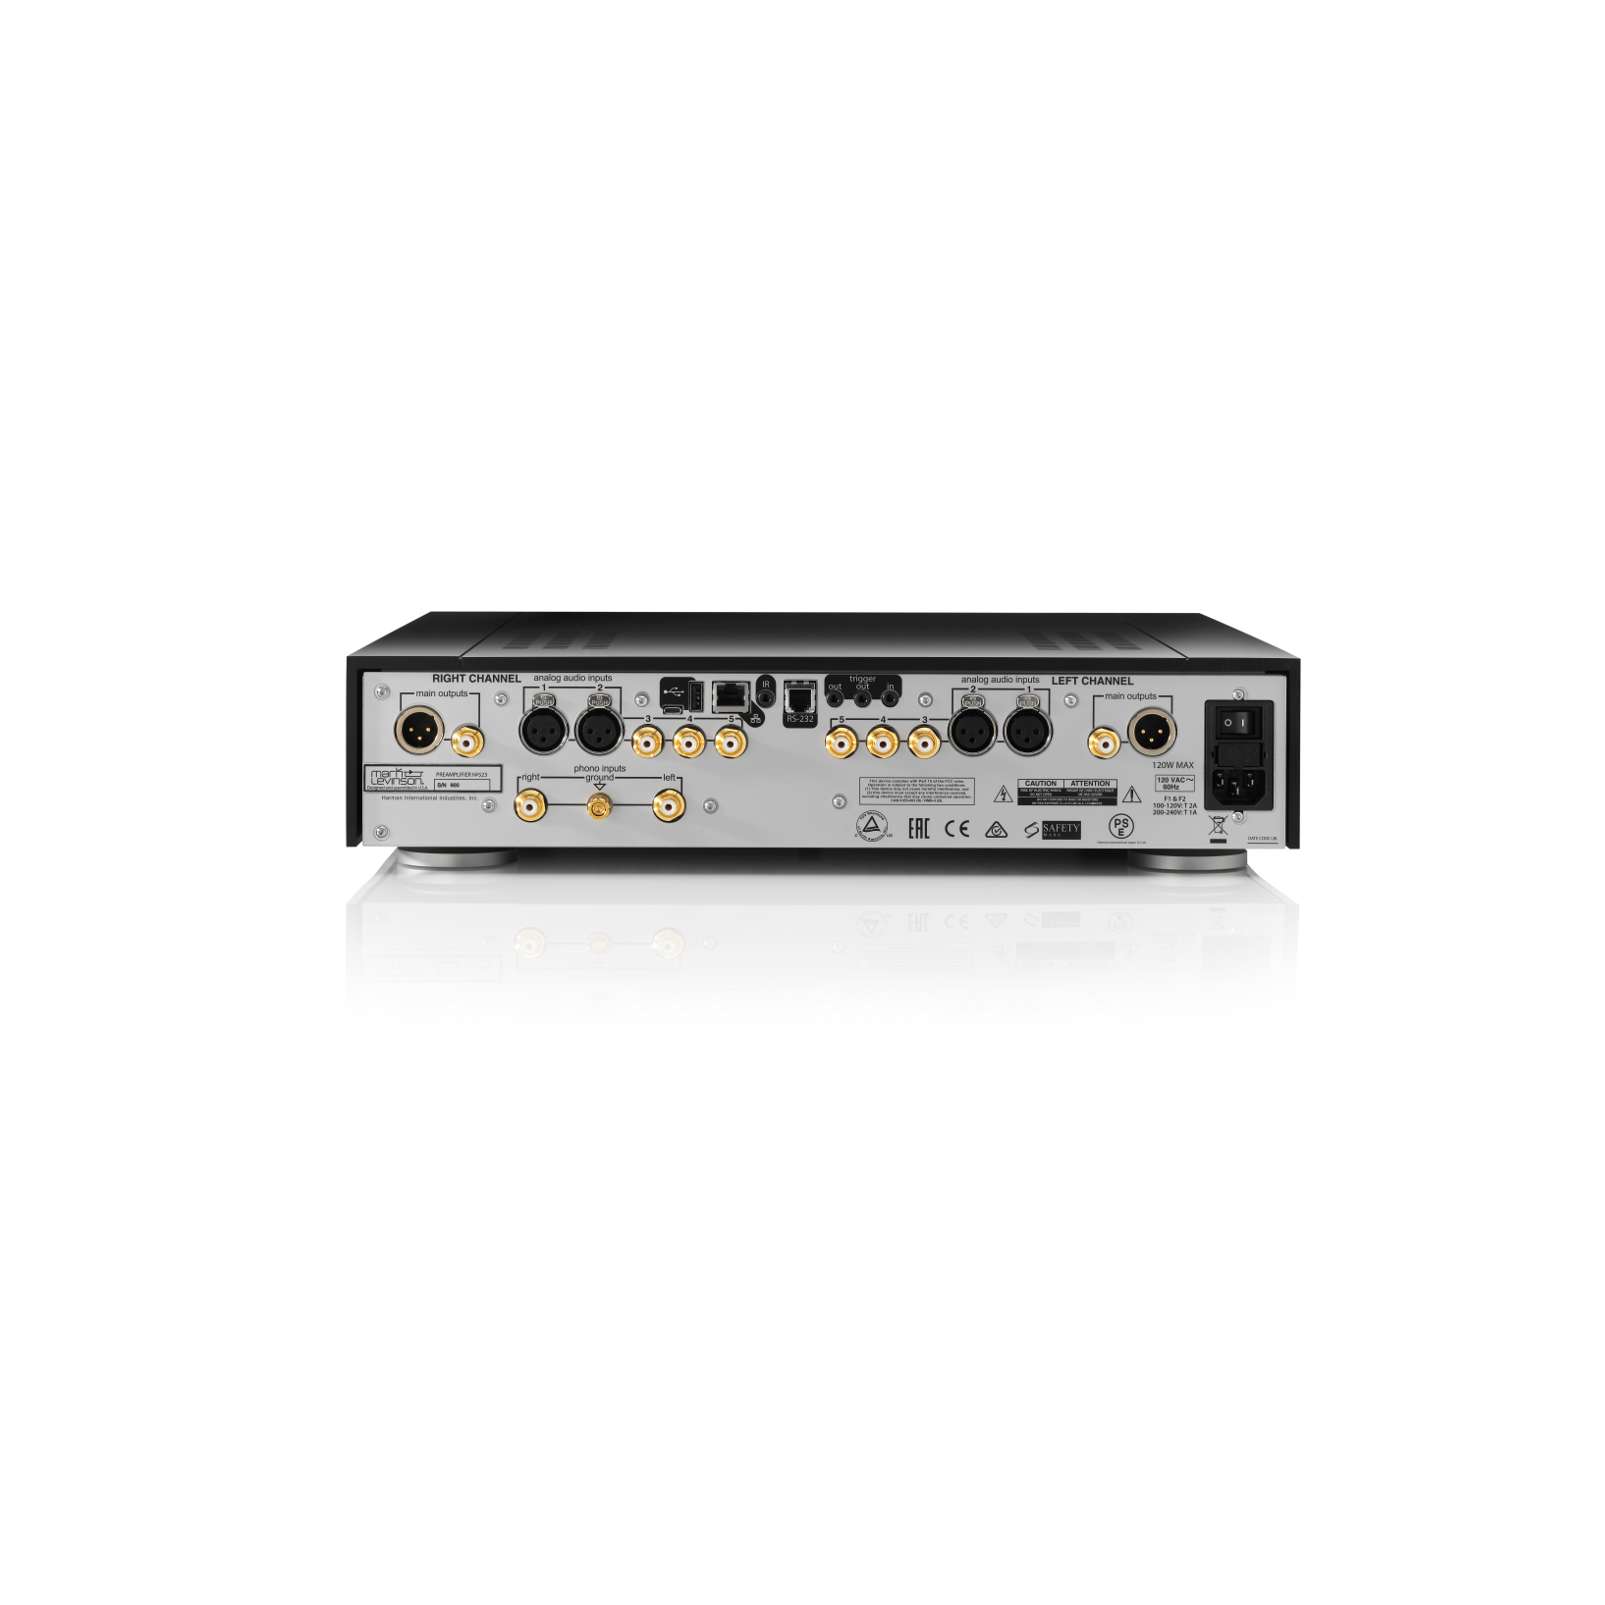 № 523 - Black - Dual-Monaural Preamplifier for Analog Sources - Back